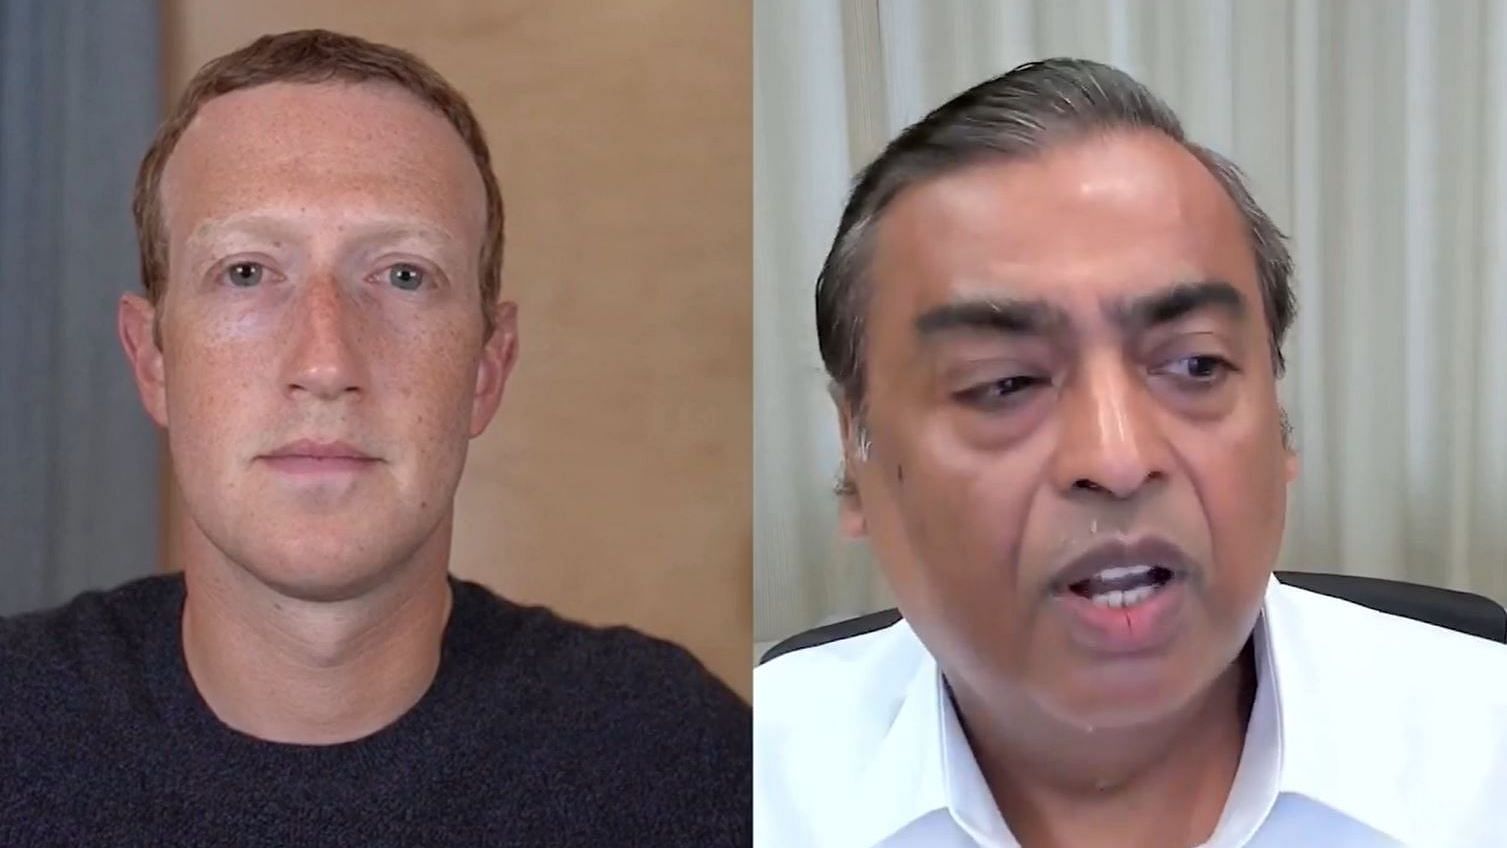 Mukesh Ambani was in conversation with Mark Zuckerberg at Facebook’s ‘Fuel for India’ event.